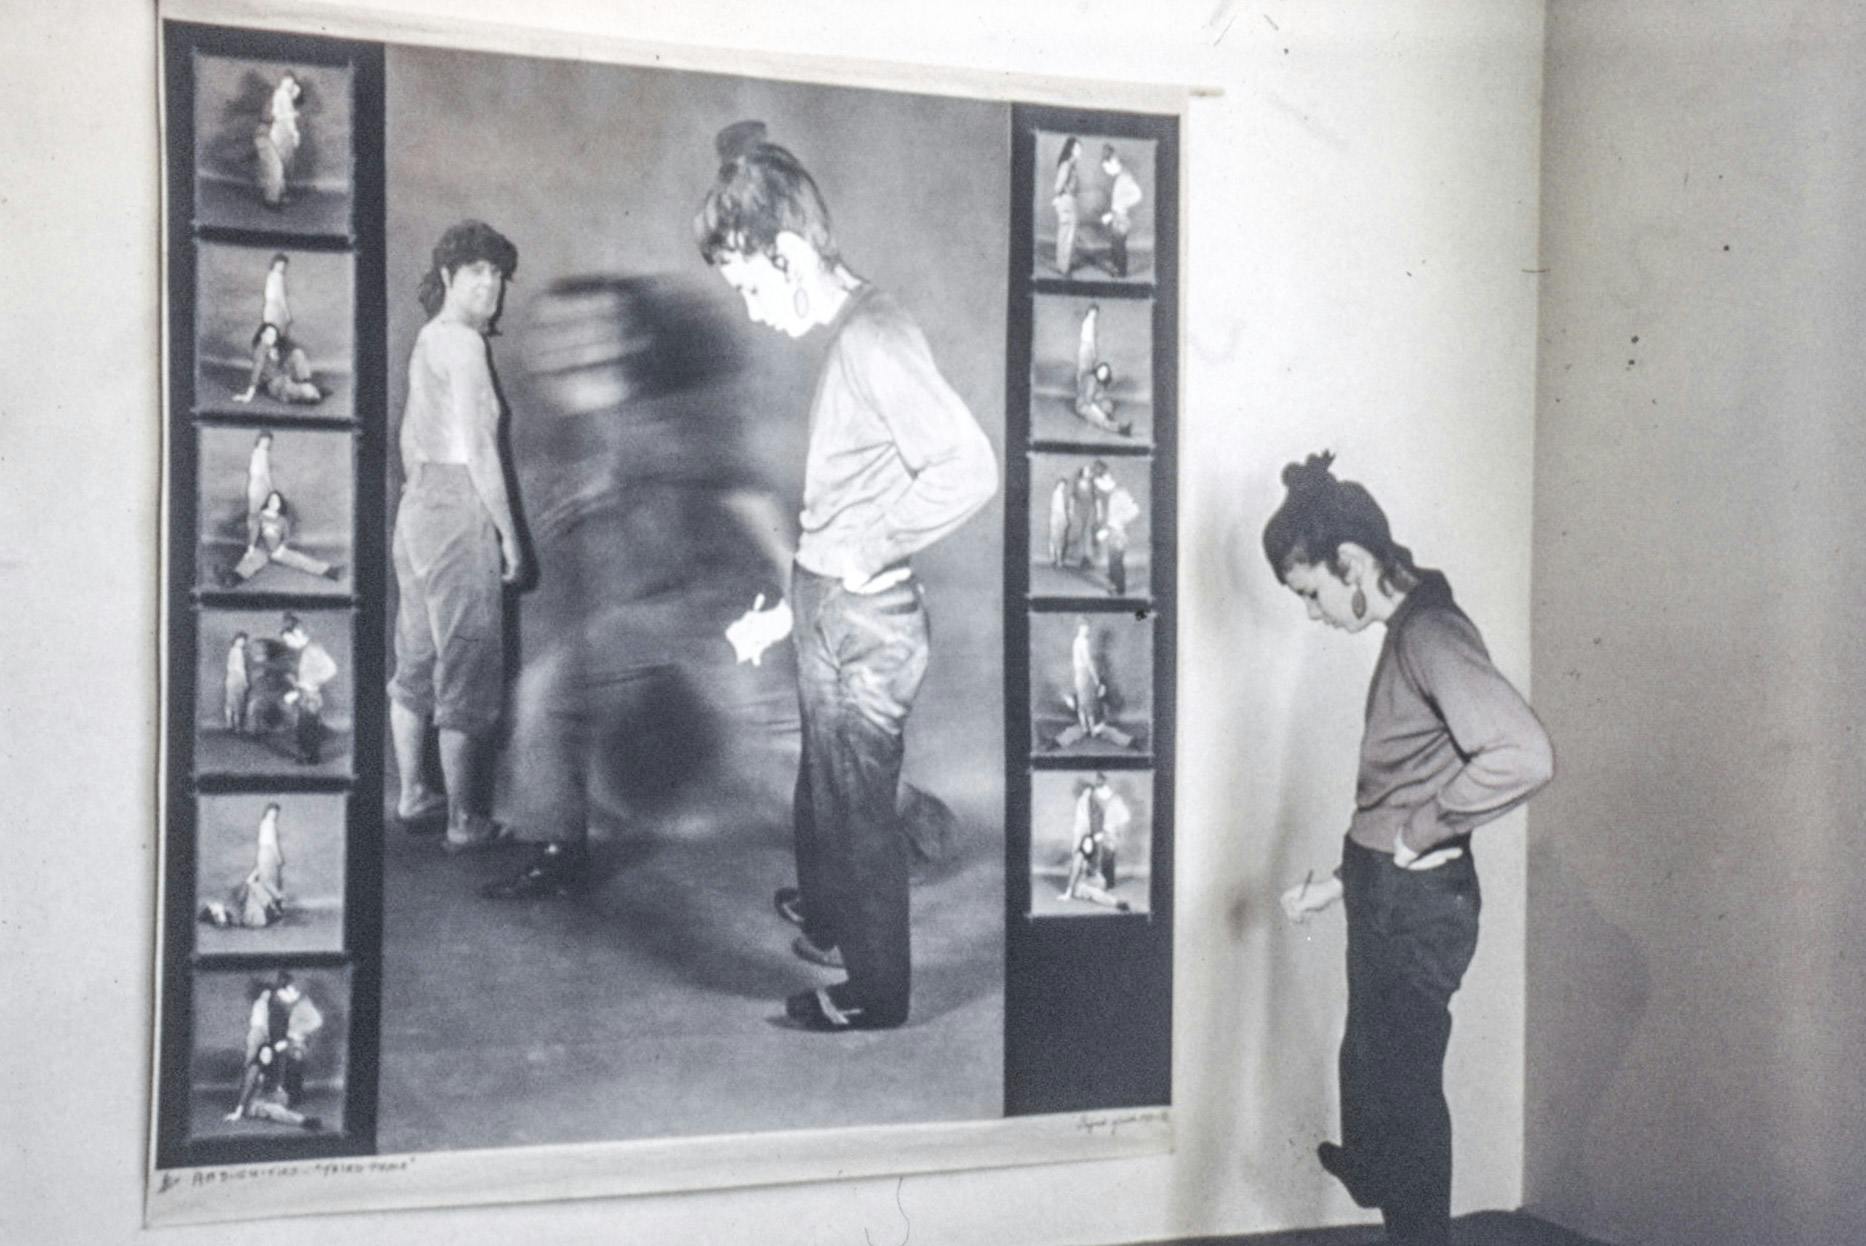 A life-size photo, and several smaller ones, of a person running between two cardboard cutouts of people mounted on a wall.  One of the cutouts is placed on the wall beside the photo.